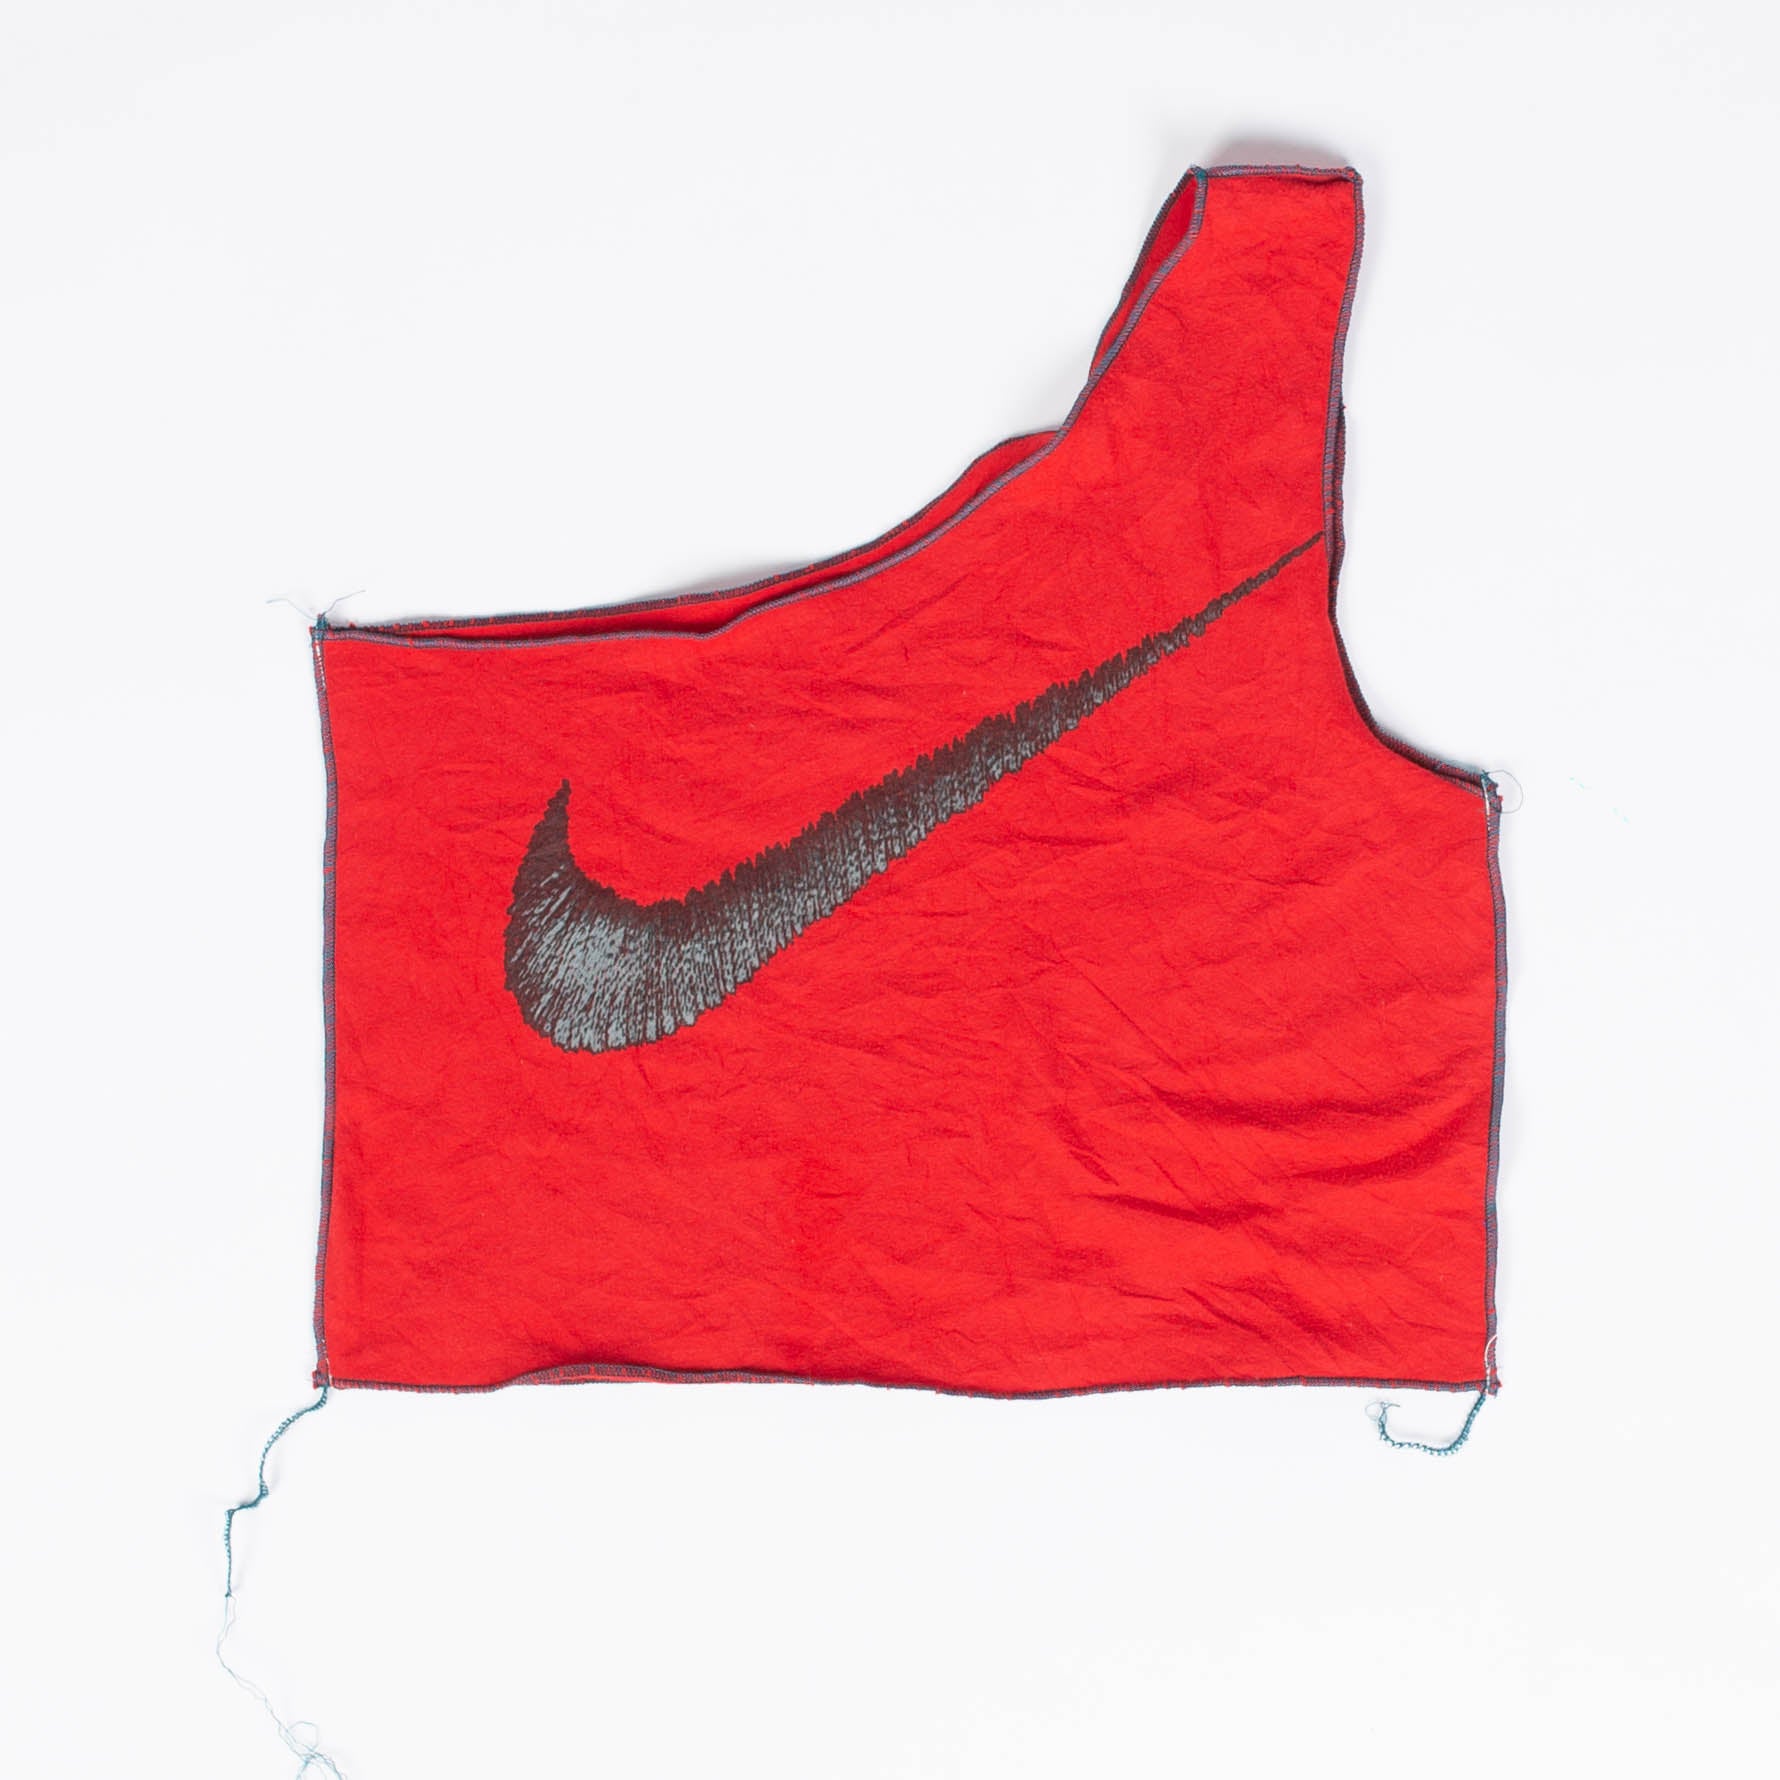 DCNSTRCTD Red Nike Crop Top Size XL